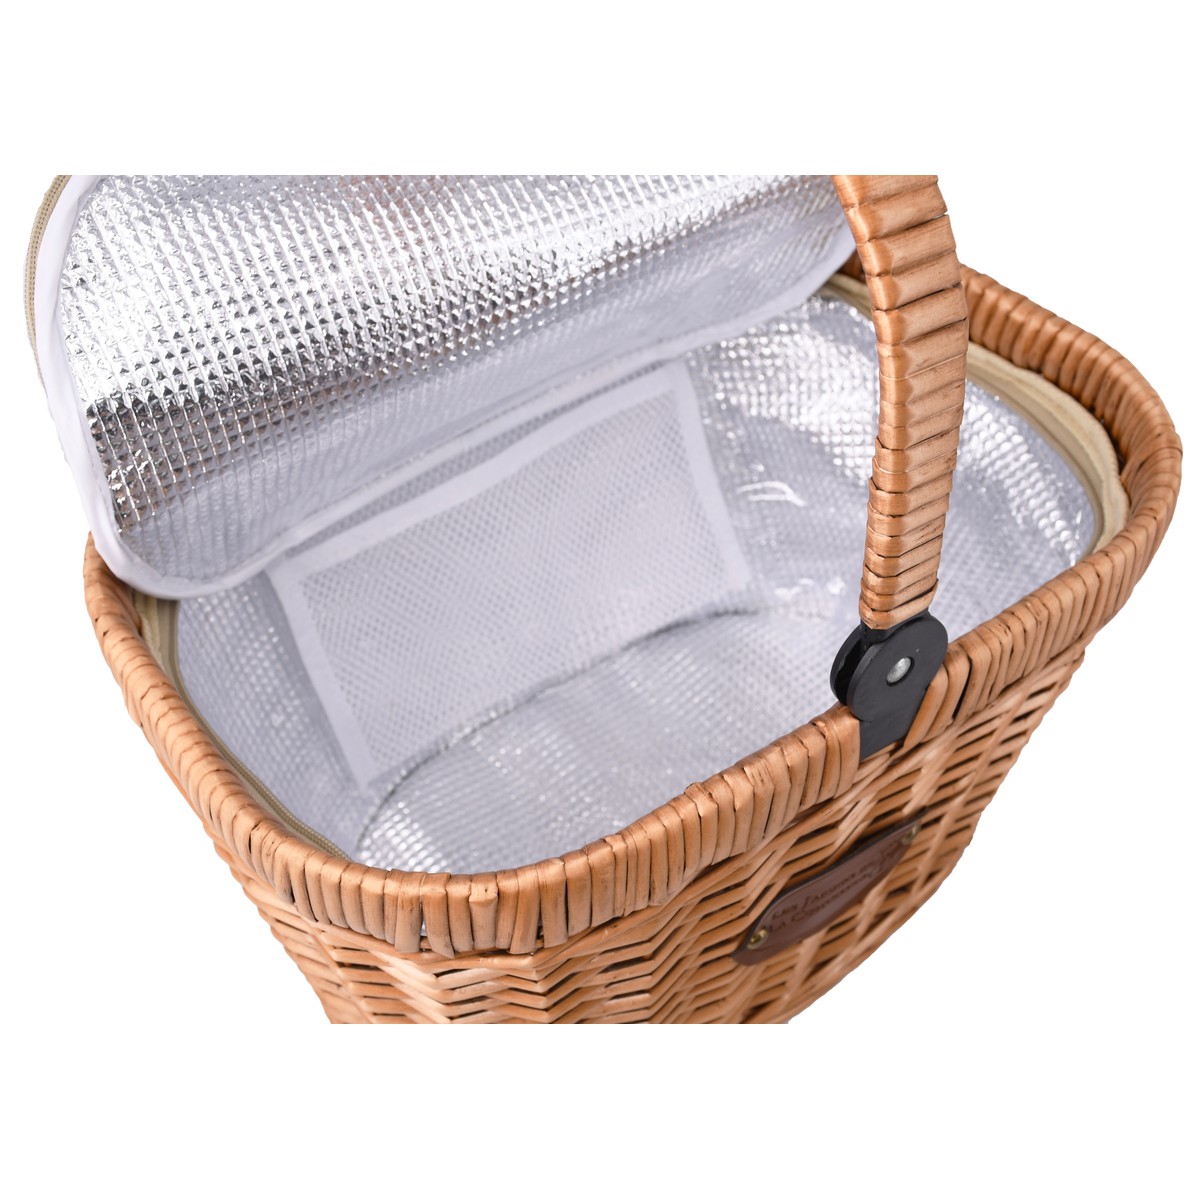  Chantilly Panier Isotherme Chantilly vichy rouge  48x28x26cm